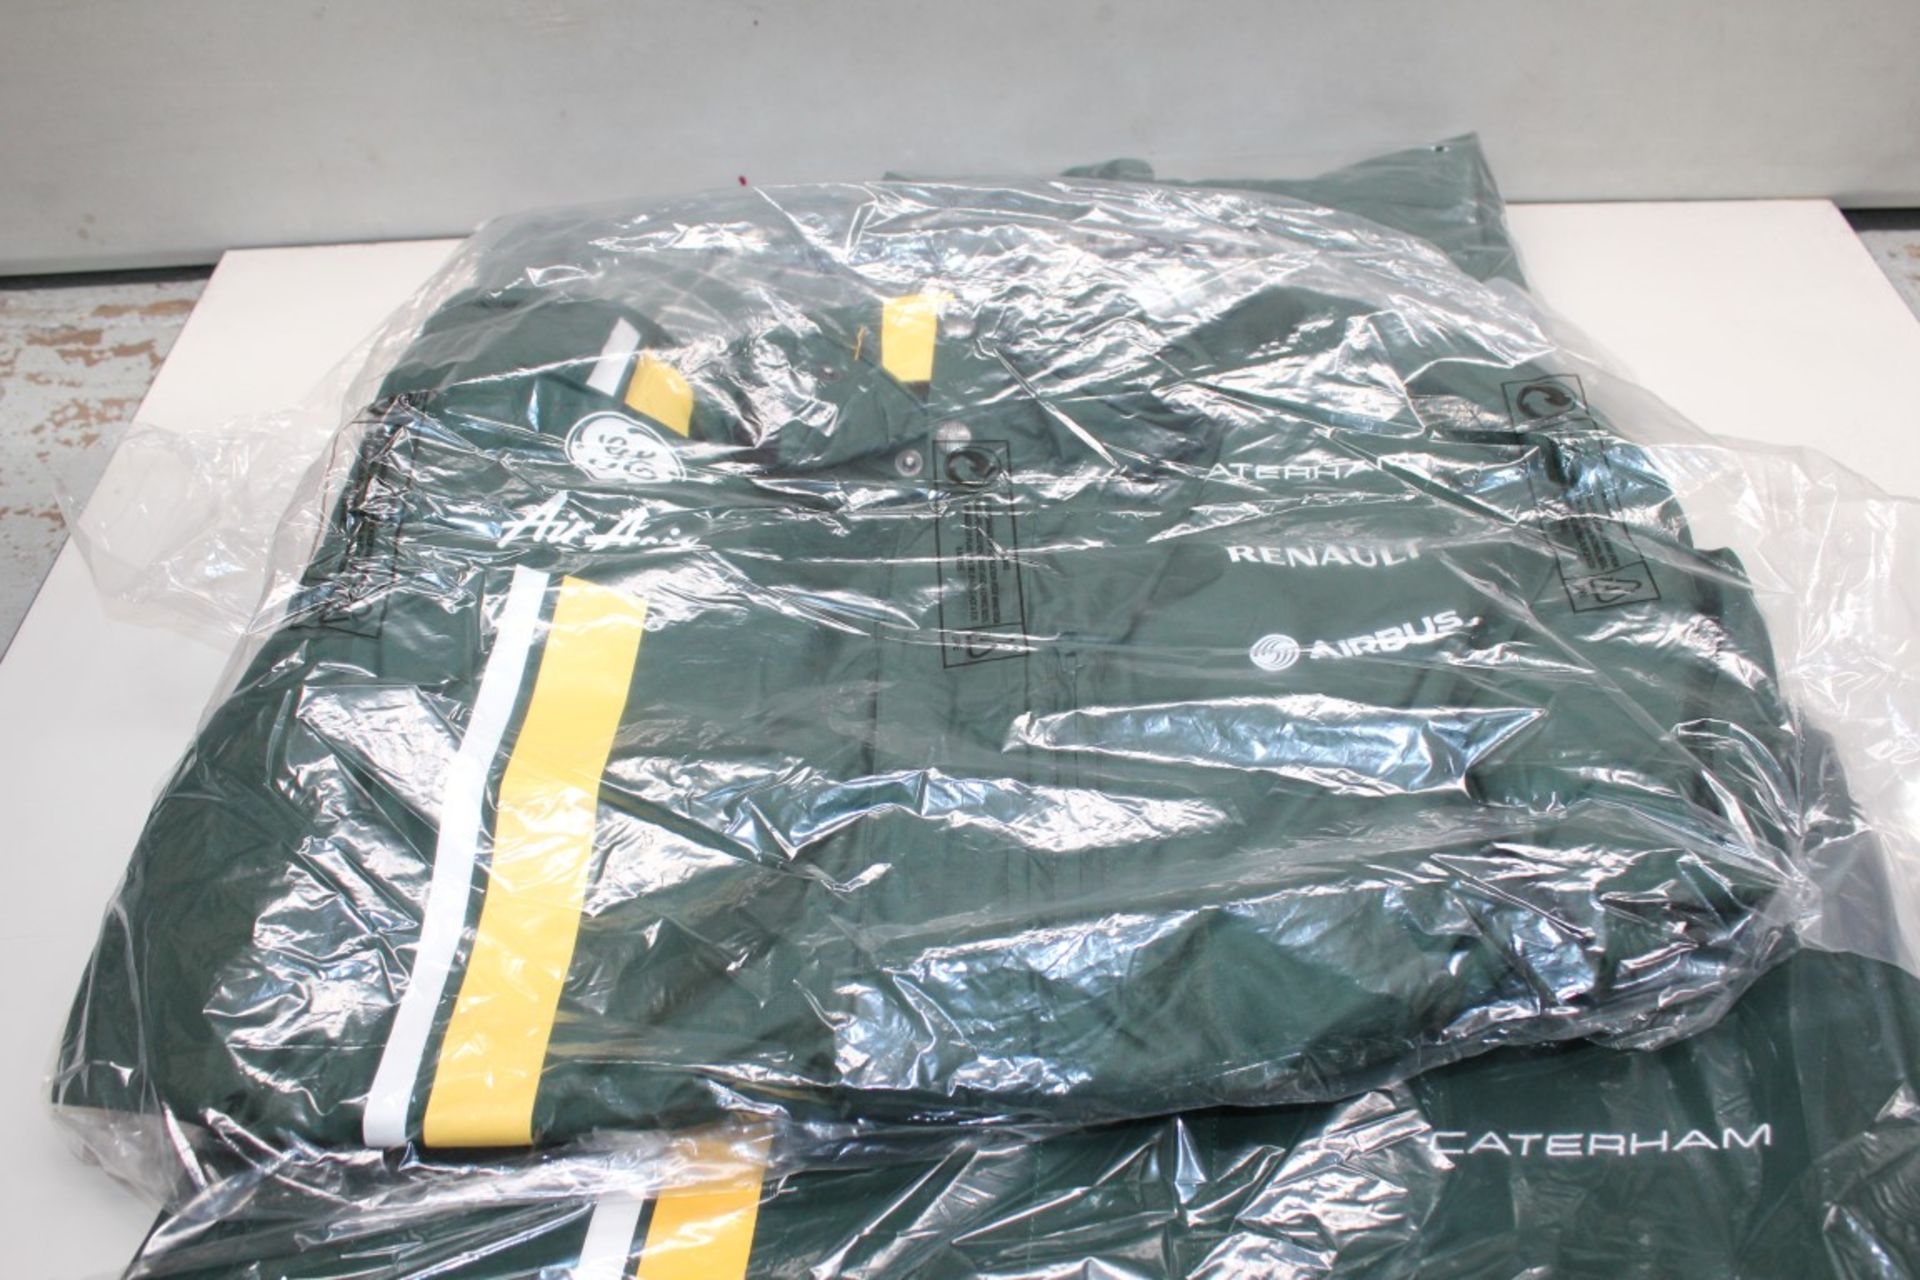 17 x Caterham F1 Team Jackets - An Assortment Of Different Styles & Designs, See Pictures - - Image 8 of 8